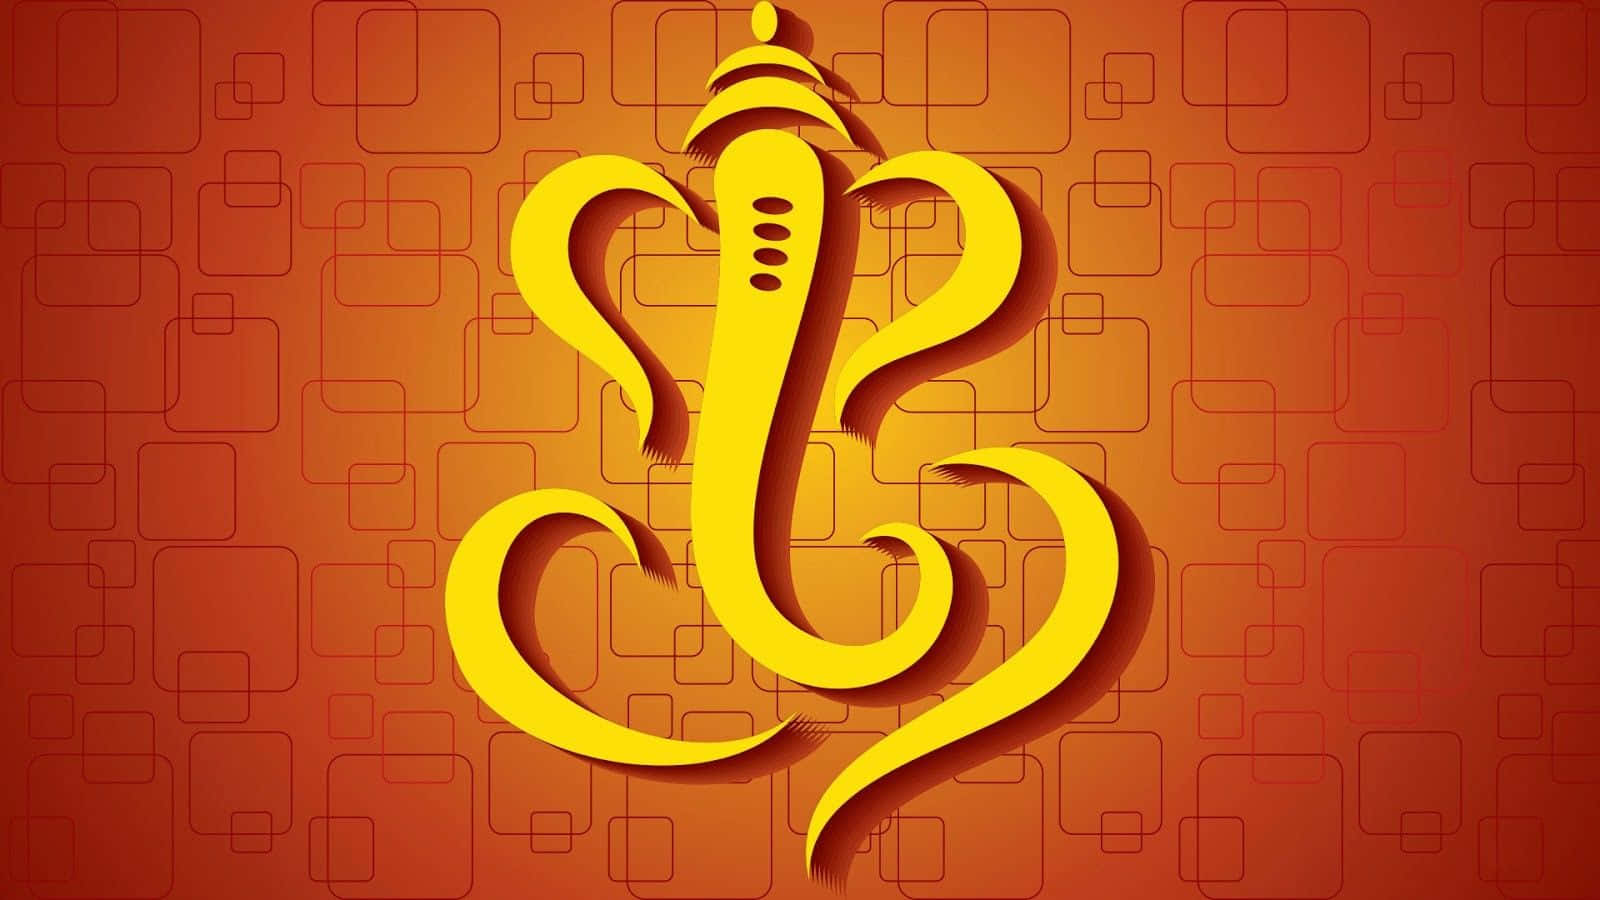 Lord Ganesha, the remover of obstacles